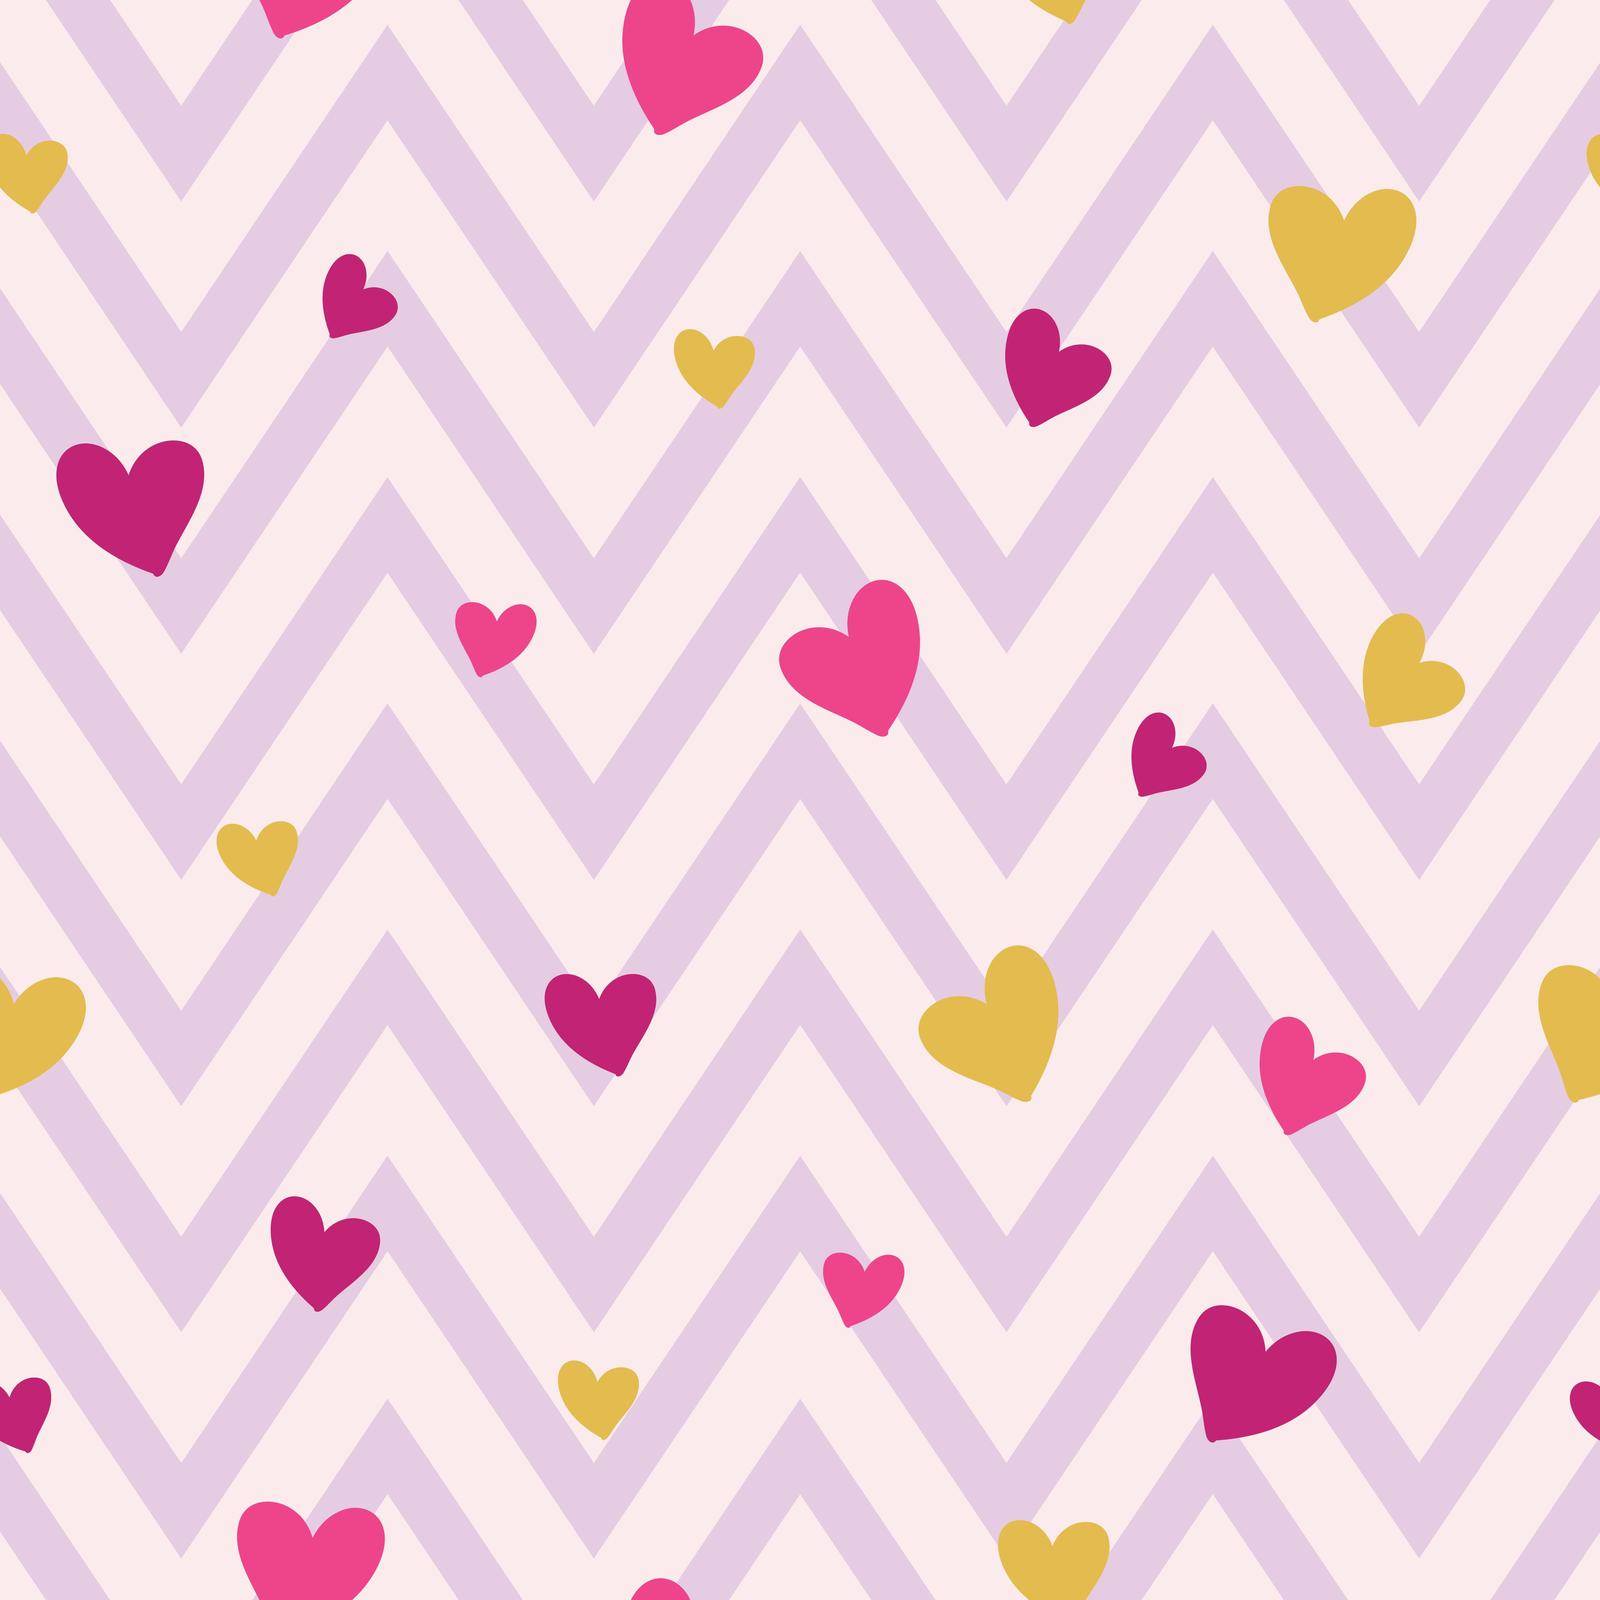 Seamless pattern with pink and gold hearts on pink chevron background illustration